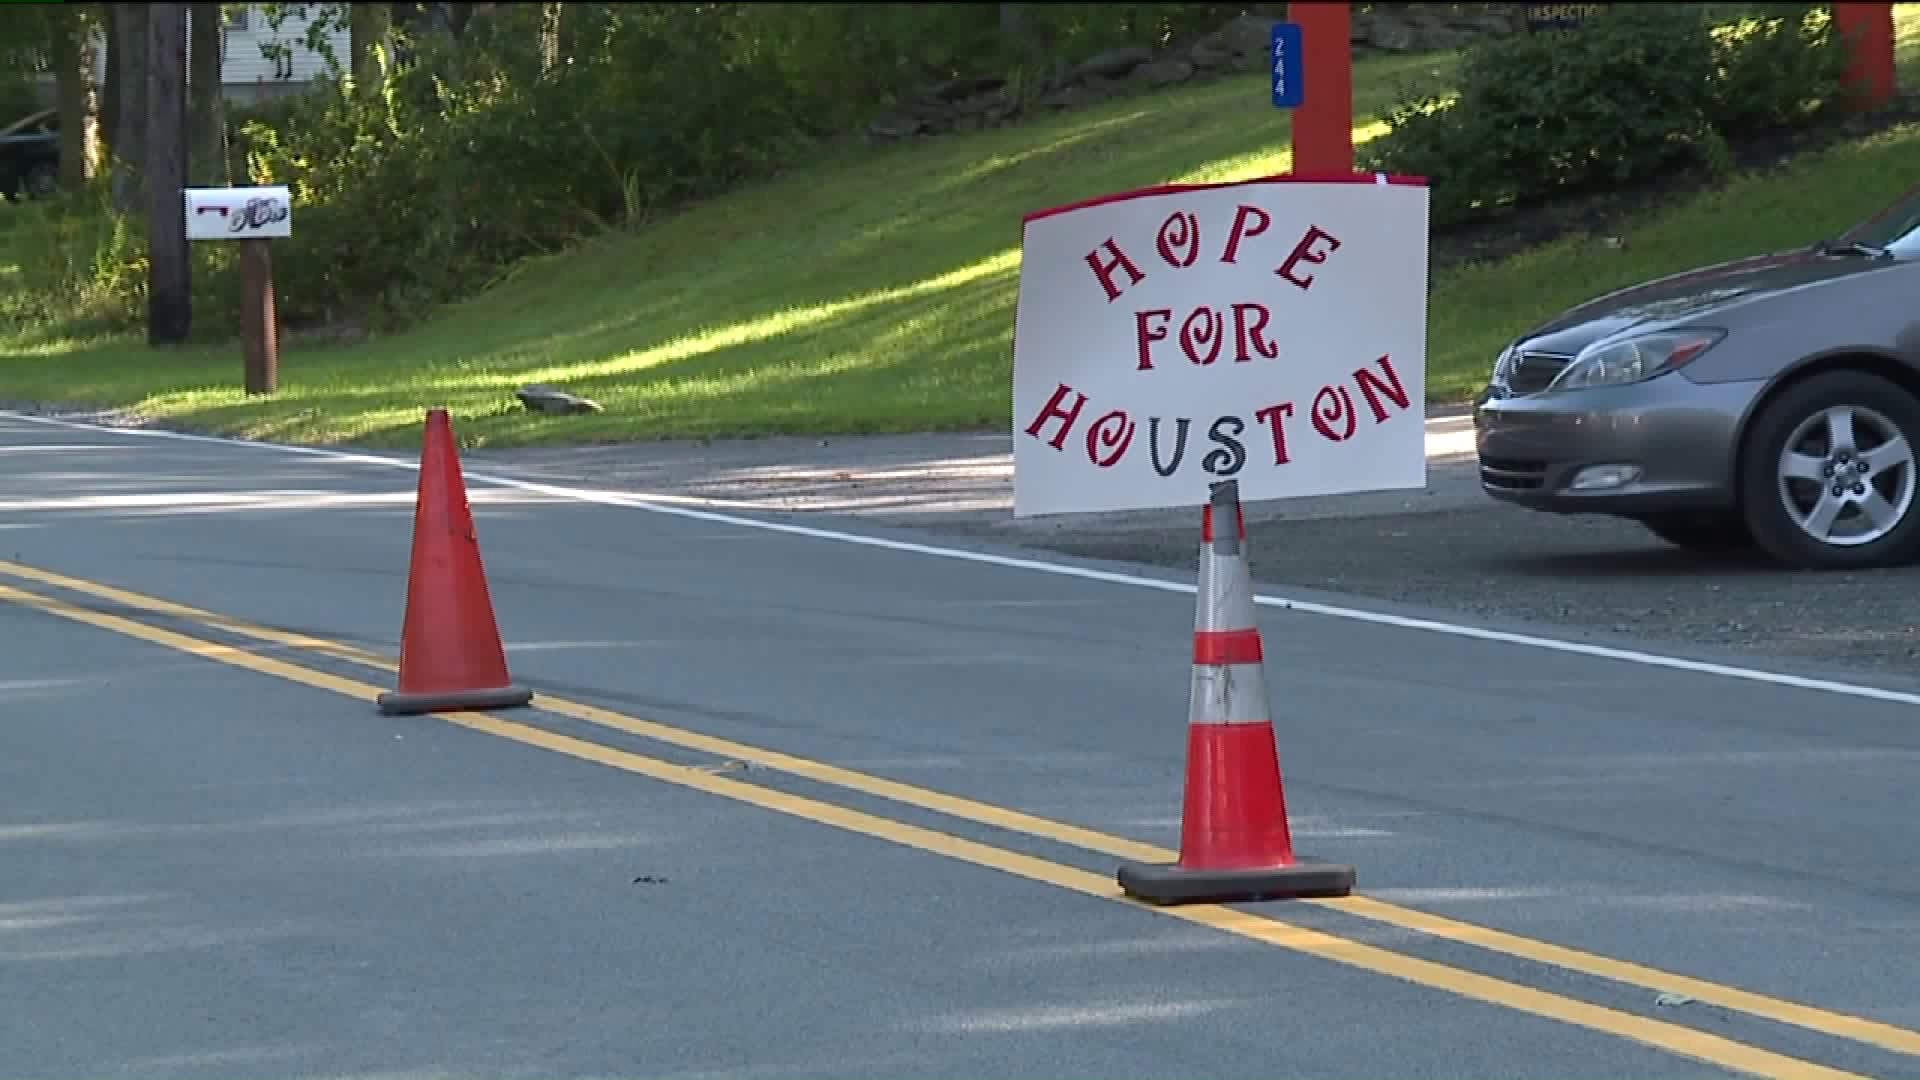 Fire Company Collecting to Help Hurricane Victims